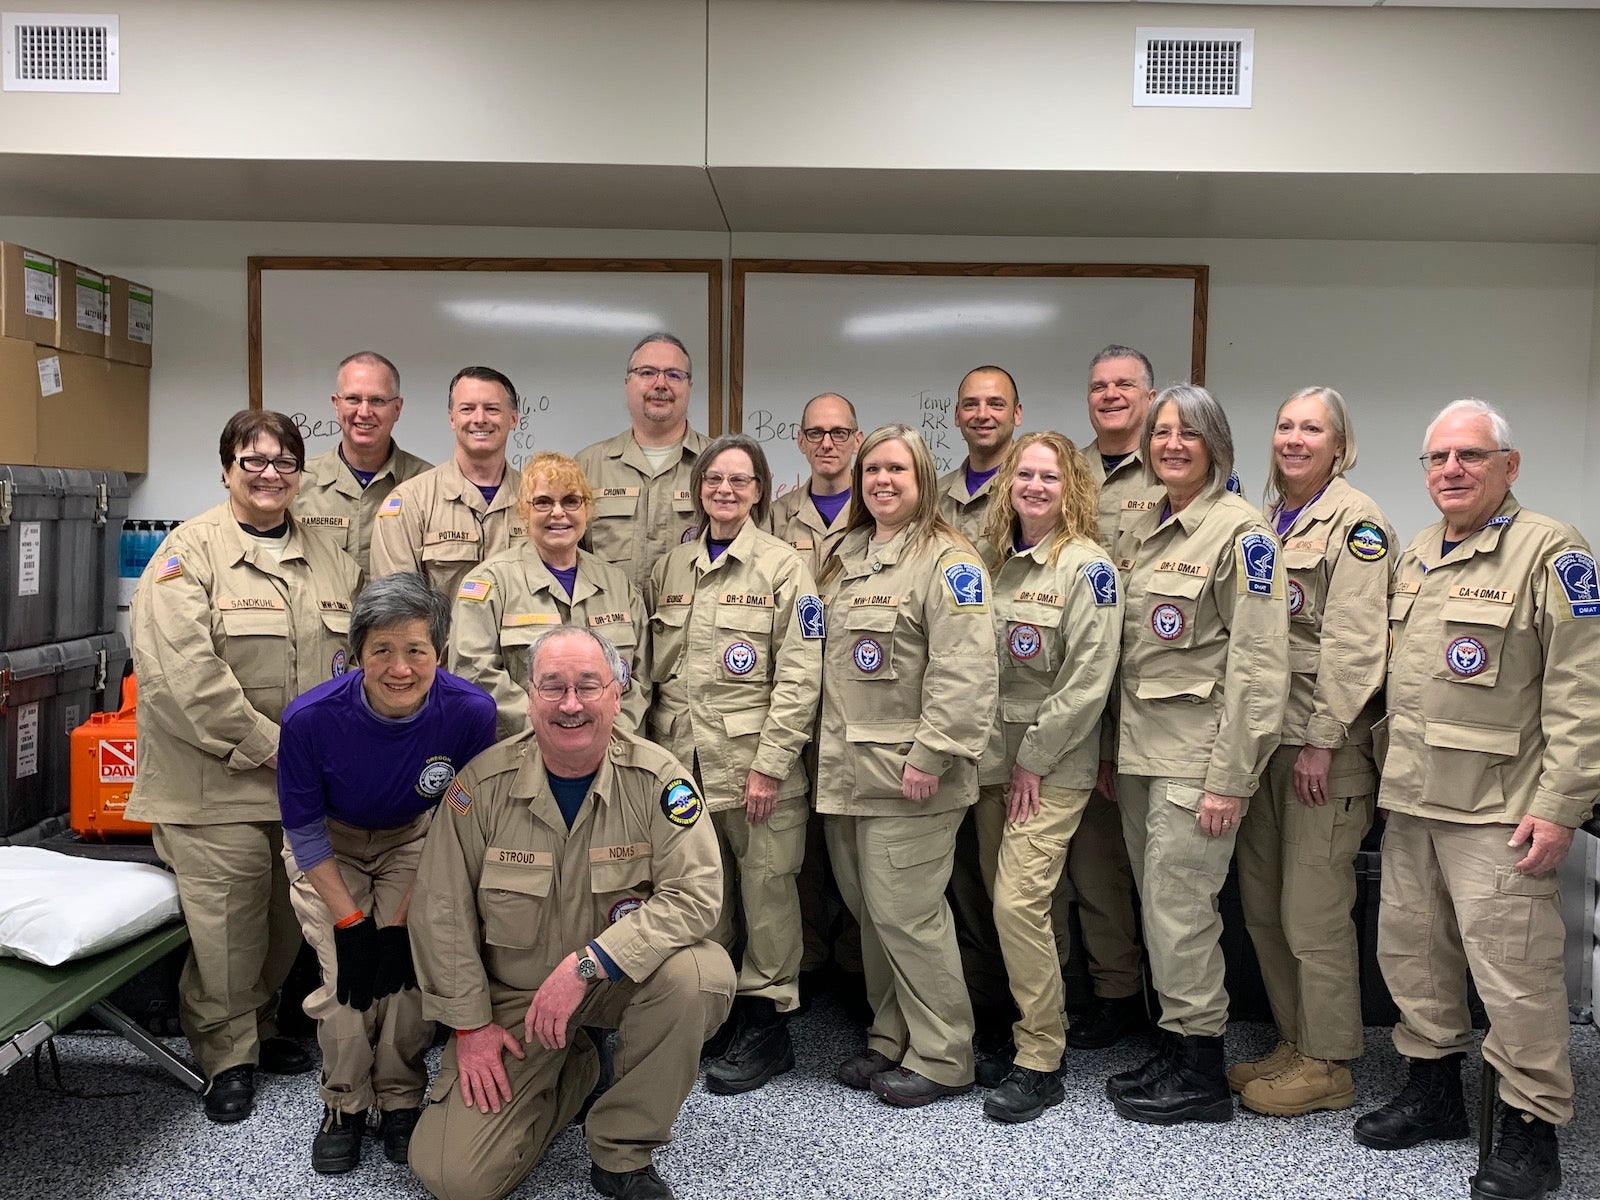 Jamie Baxter (fifth from left) with her fellow National Disaster Medical System Disaster Medical Assistance Team members at the Camp Ashland Army National Guard Base near Omaha, Nebraska.